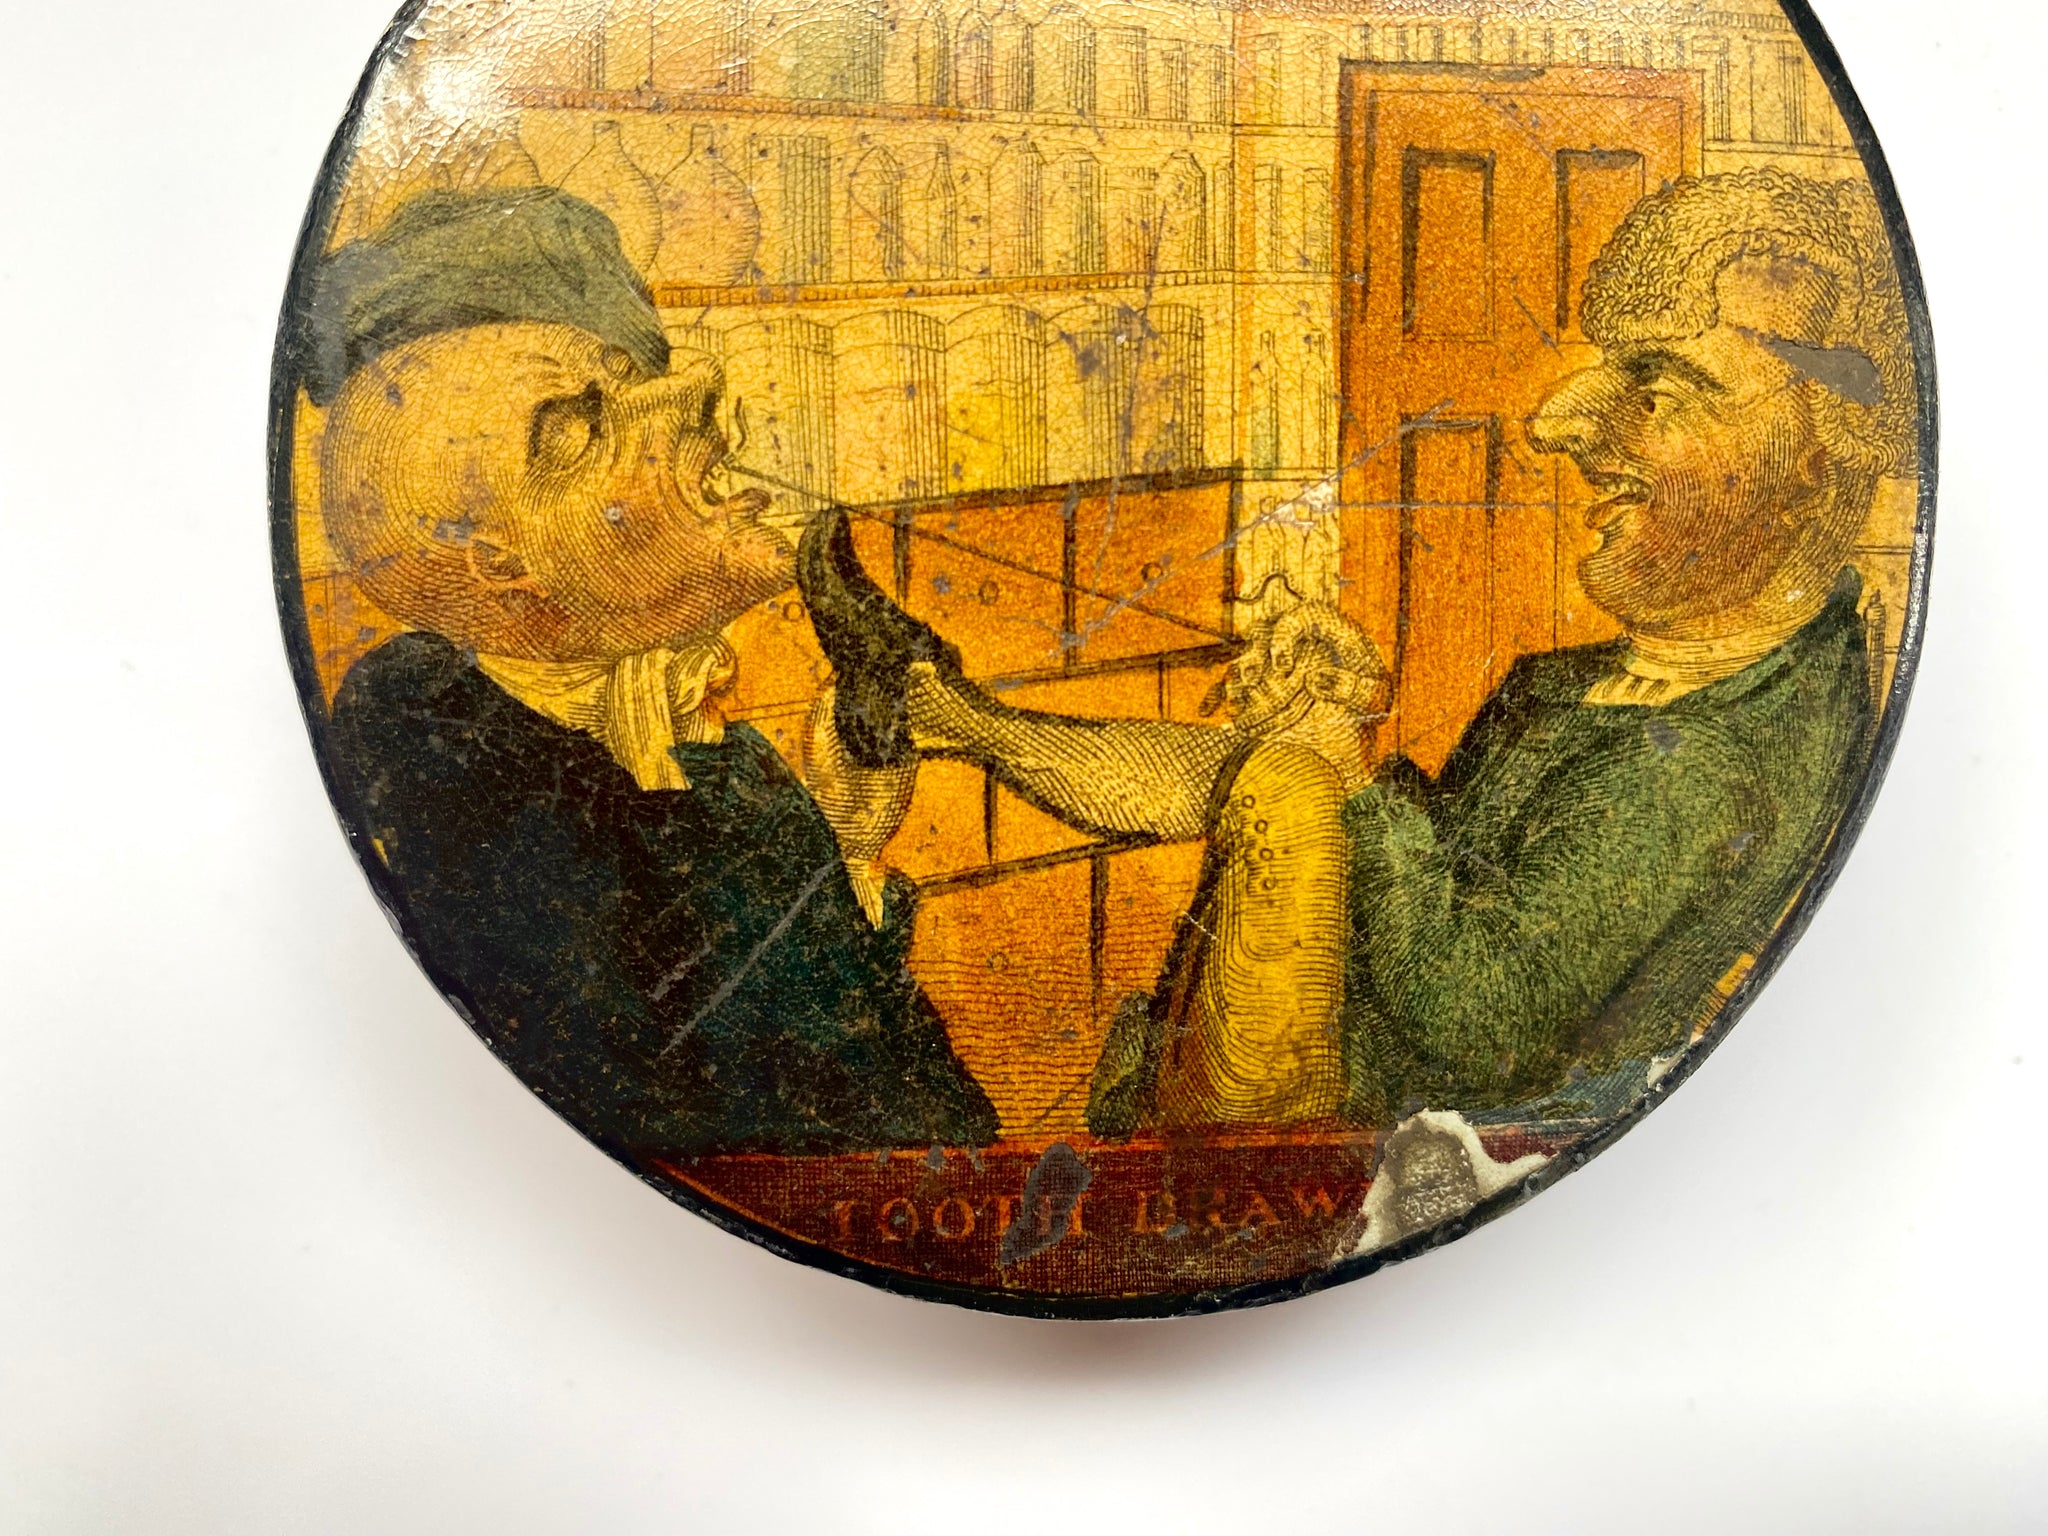 A 19th Century Handpainted Papier Mache Snuff Box With Comical Tooth Extraction Image - Source Vintage